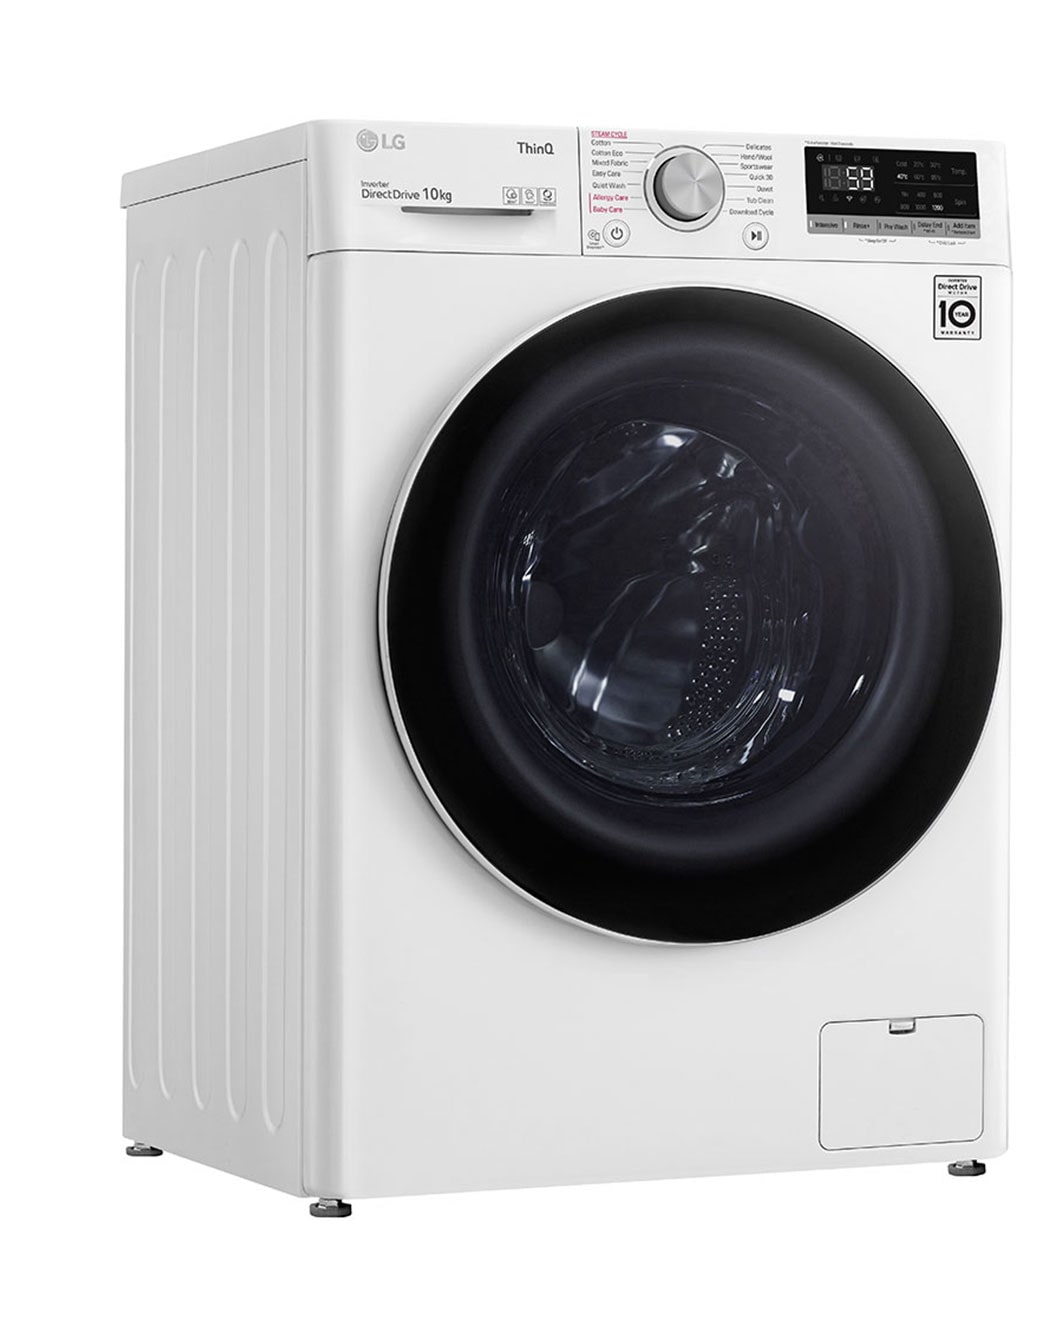 LG 10kg Front Load Washing Machine with Steam LG New Zealand